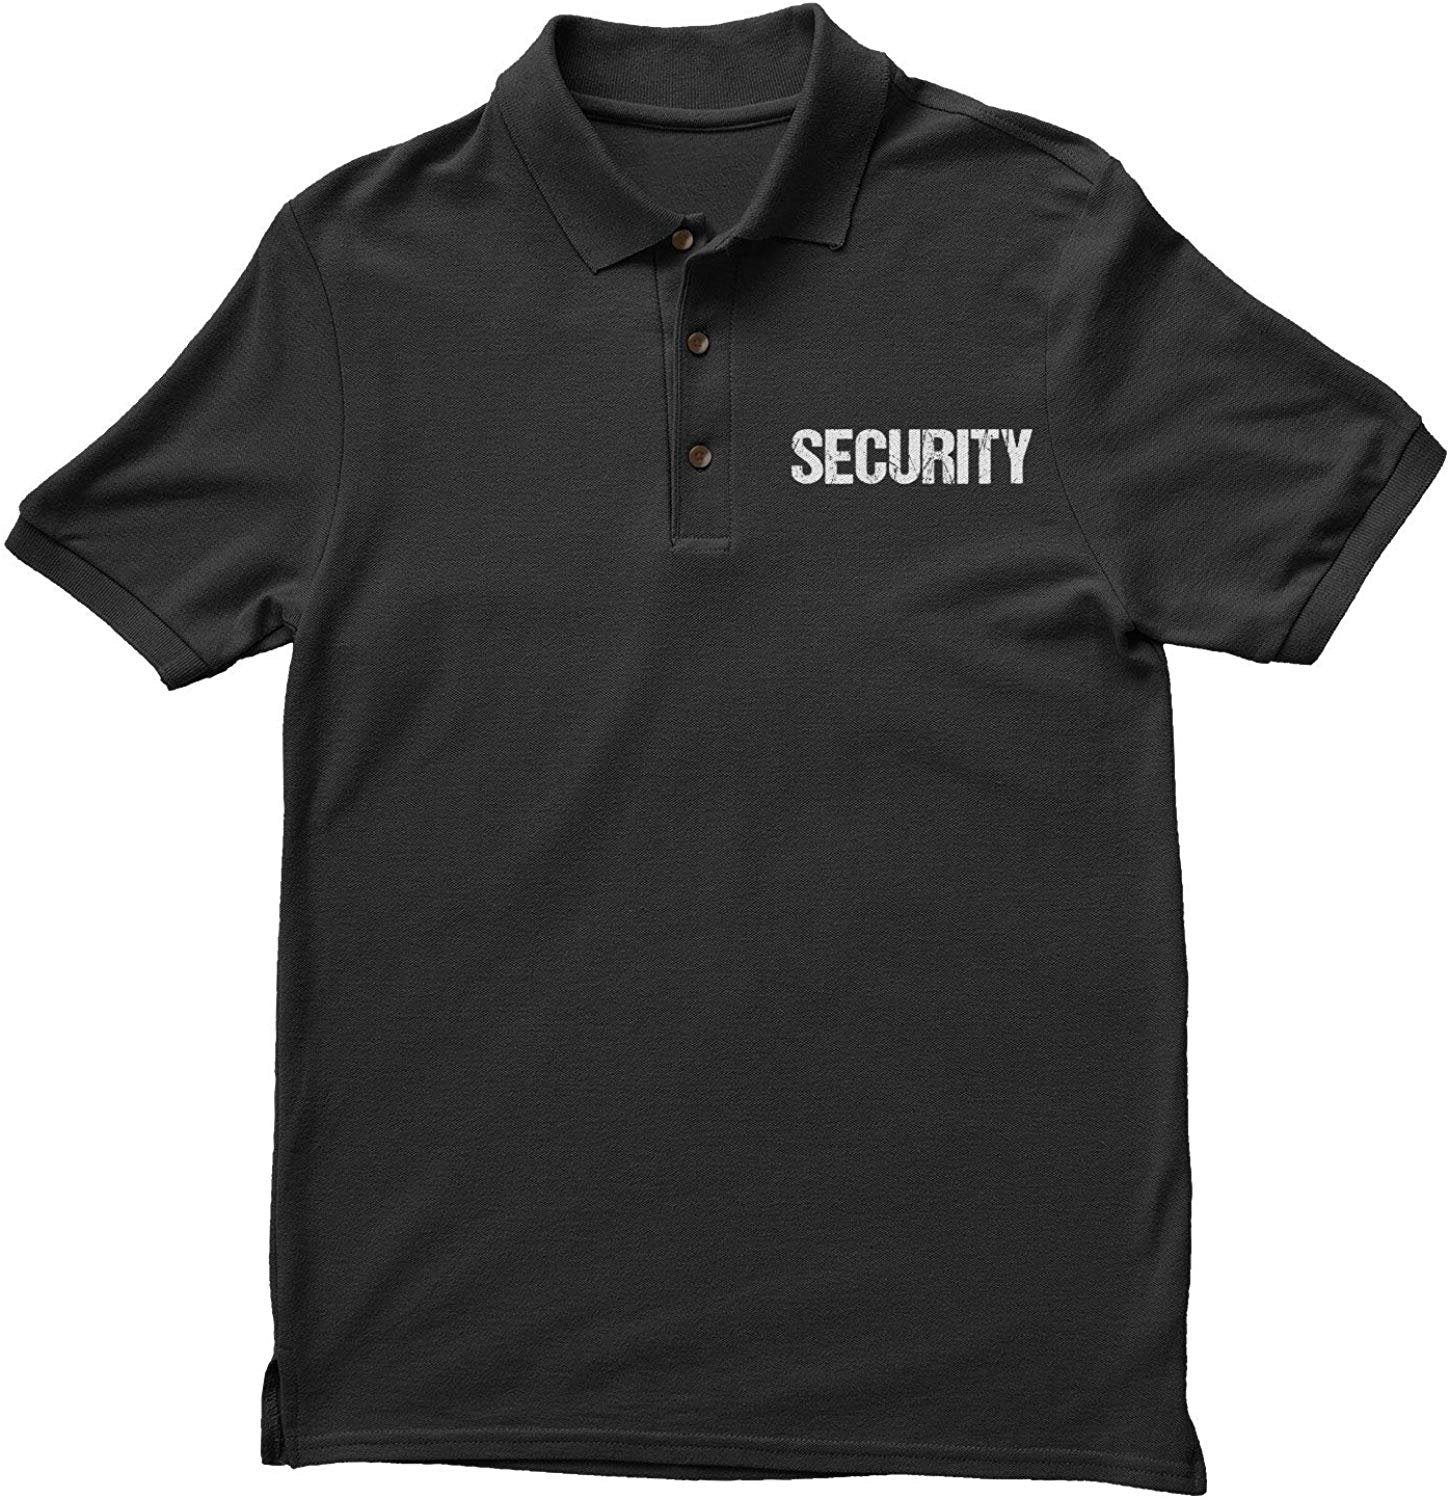 Security Polo Shirt Front & Back Print (Distressed, Black & White)